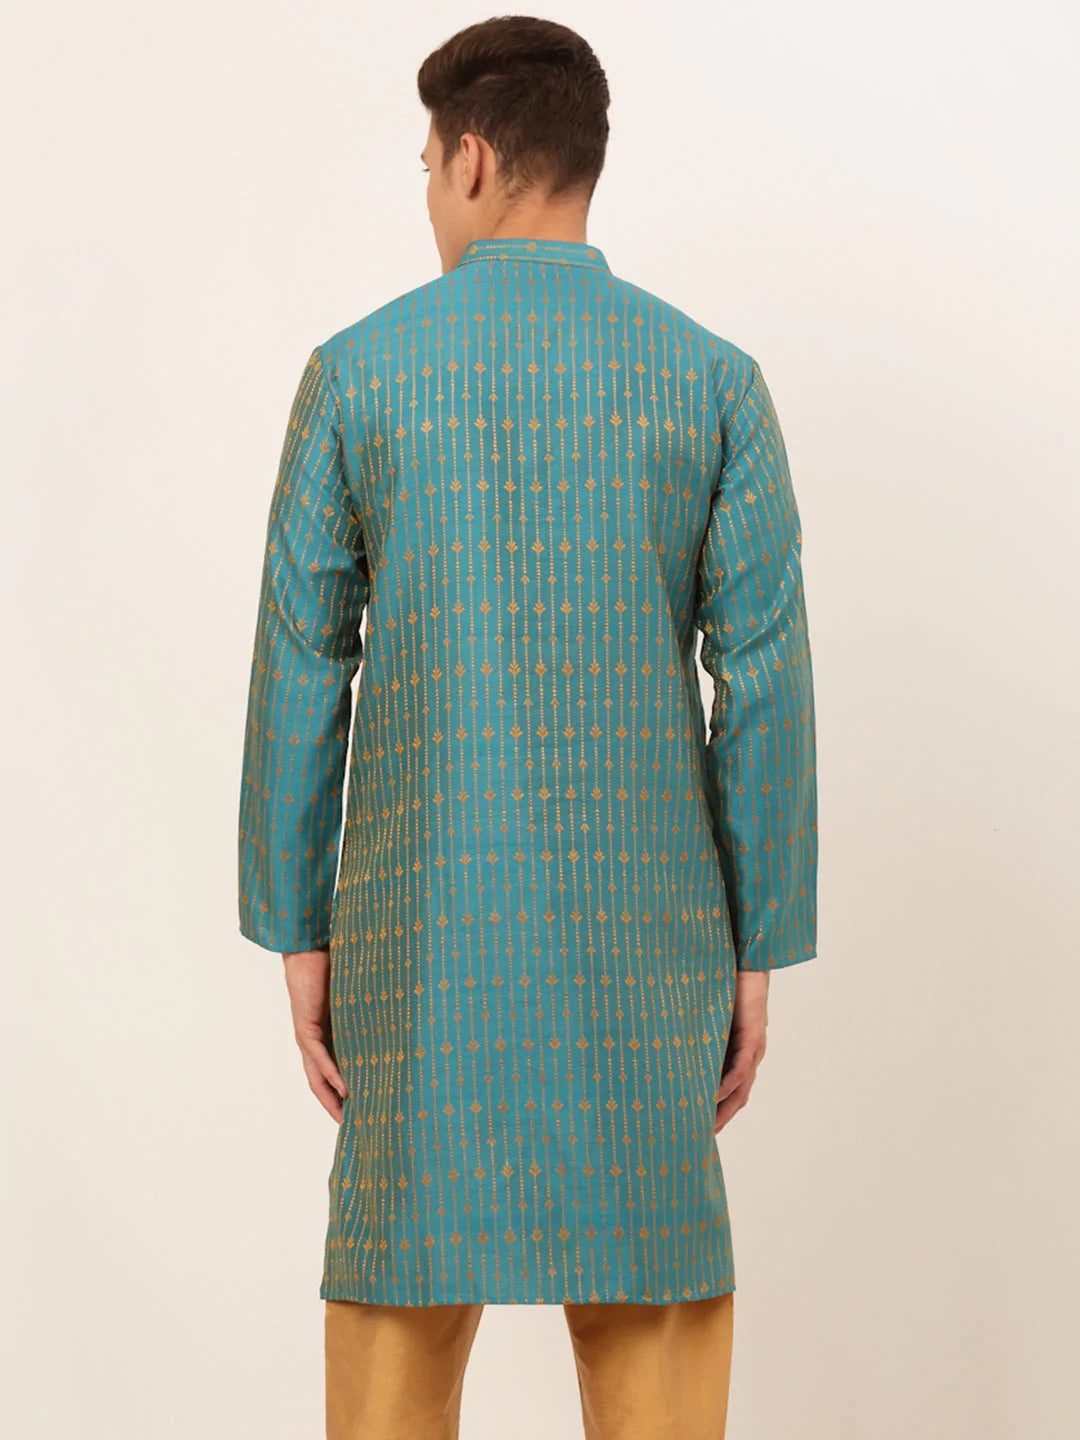 Jompers Men's Blue Embroidered Kurta Only ( KO 676 Blue )